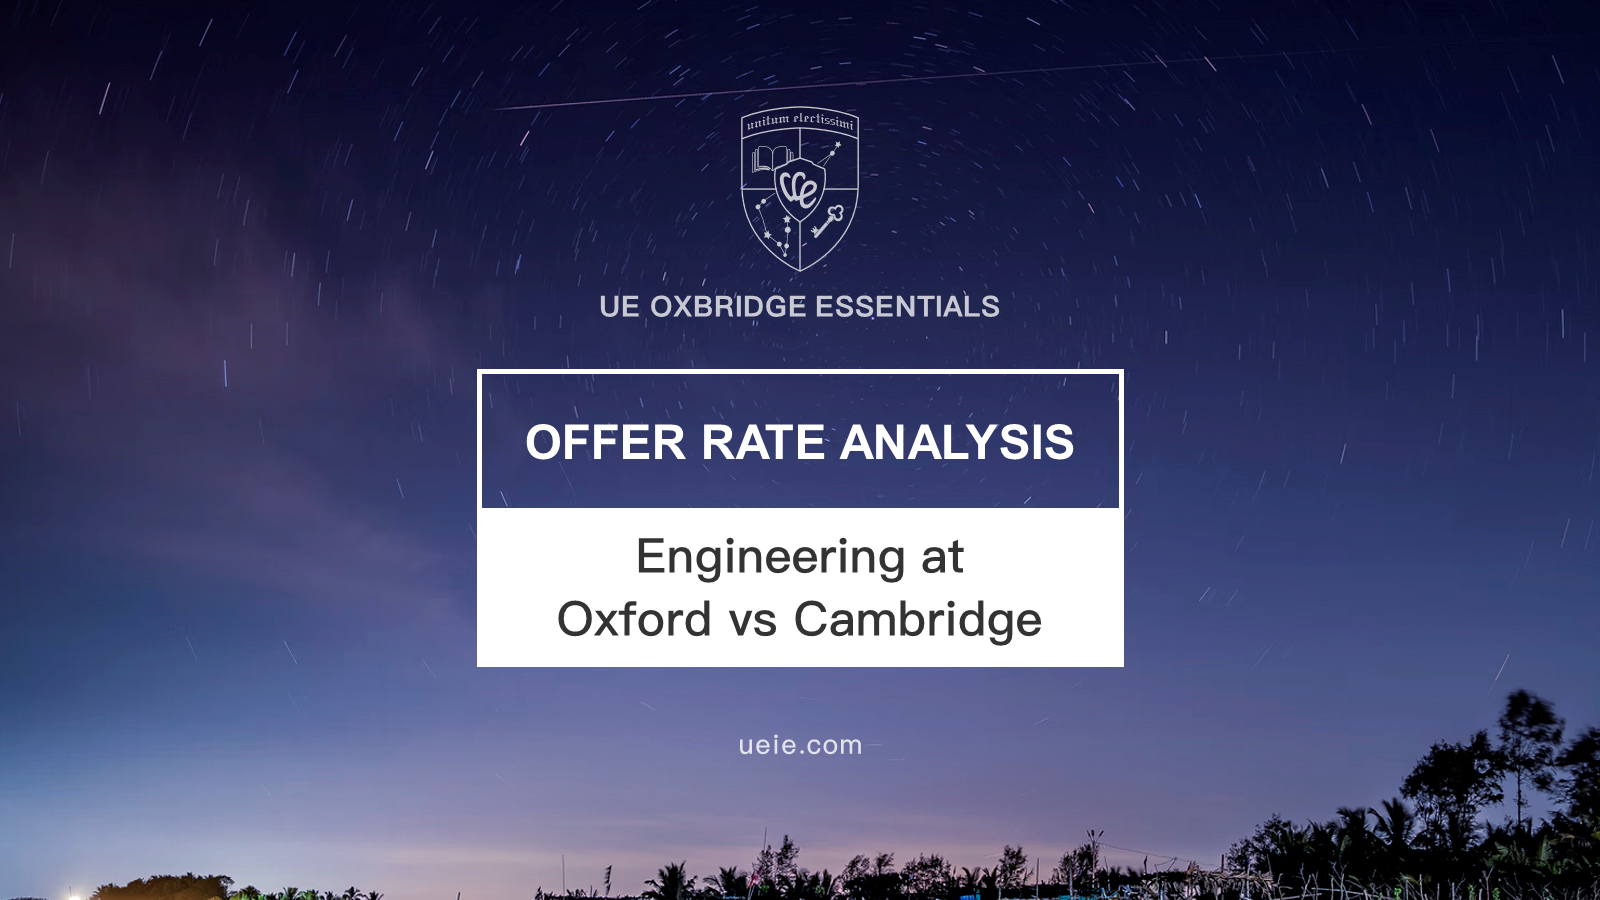 Engineering at Oxford and Cambridge Offer Rates Analysis